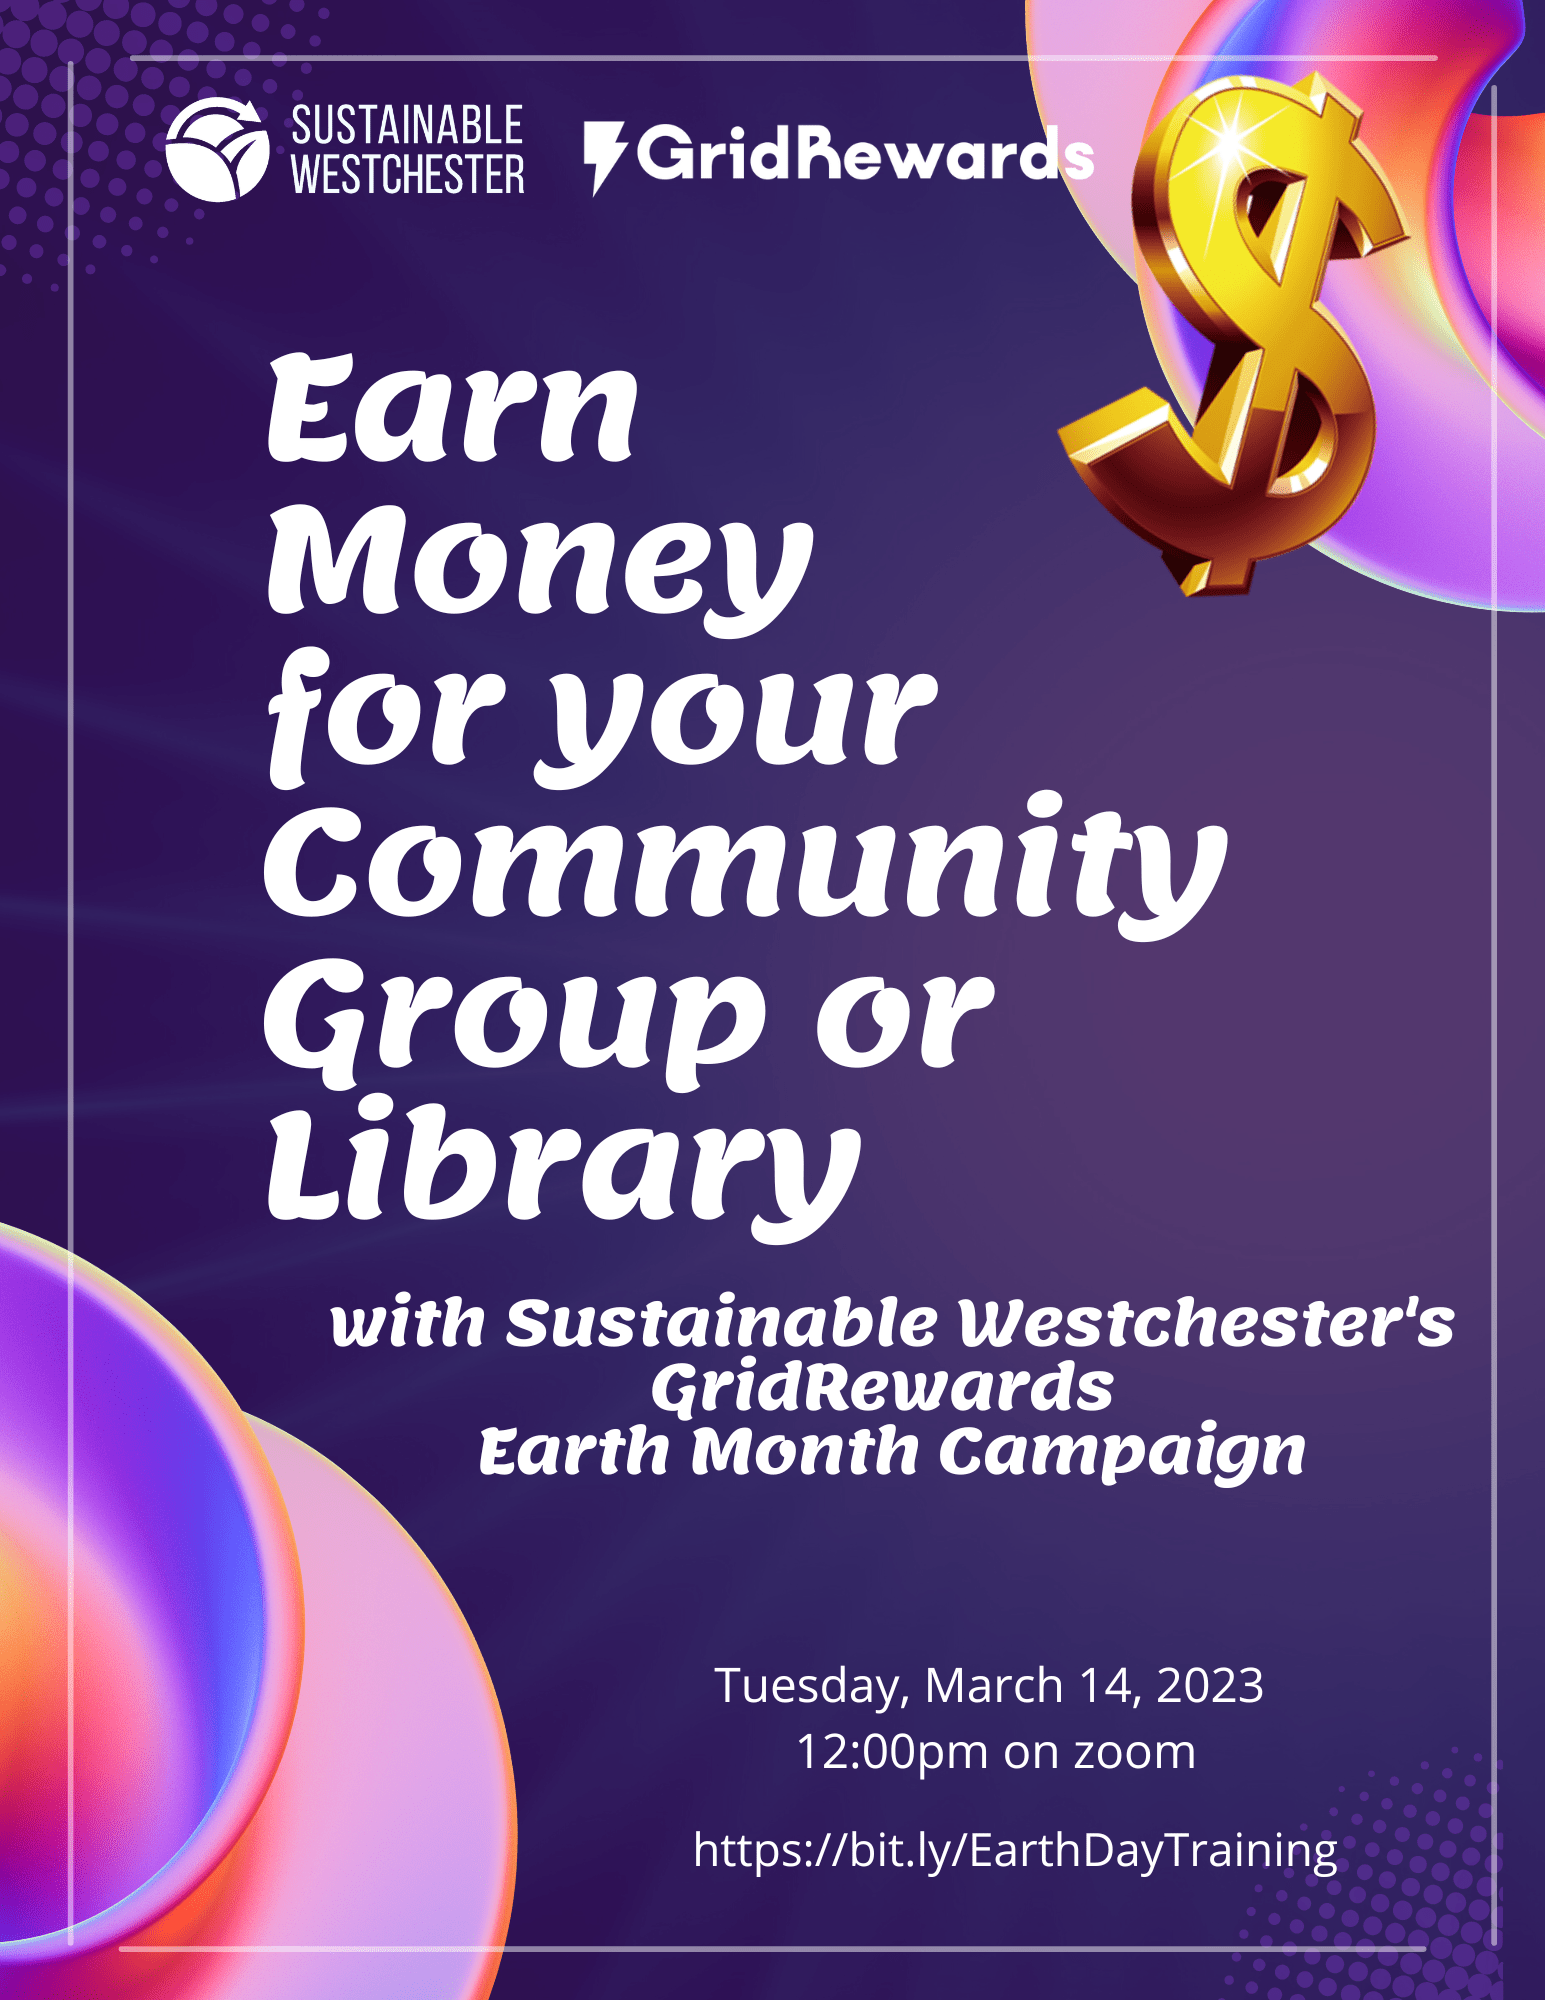 Join Sustainable Westchester’s GridRewards Earth Month Cohort